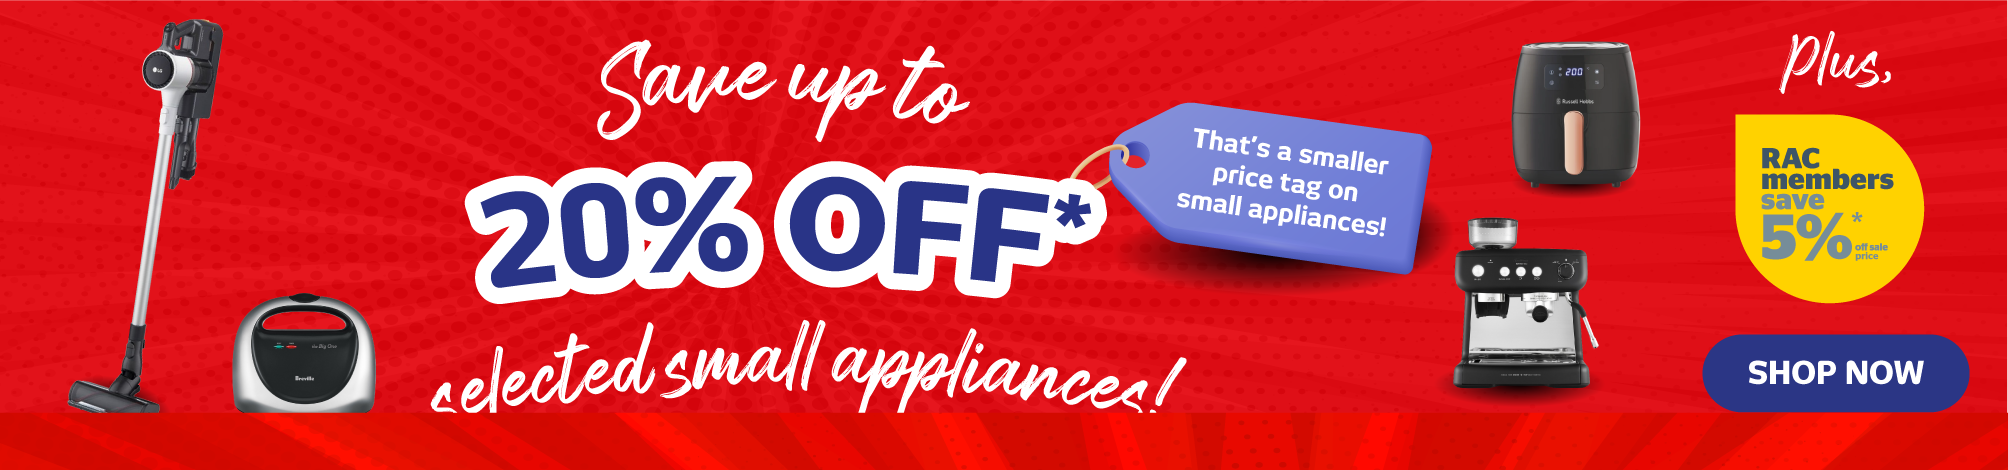 Save Up To 20% On Selected Small Appliances